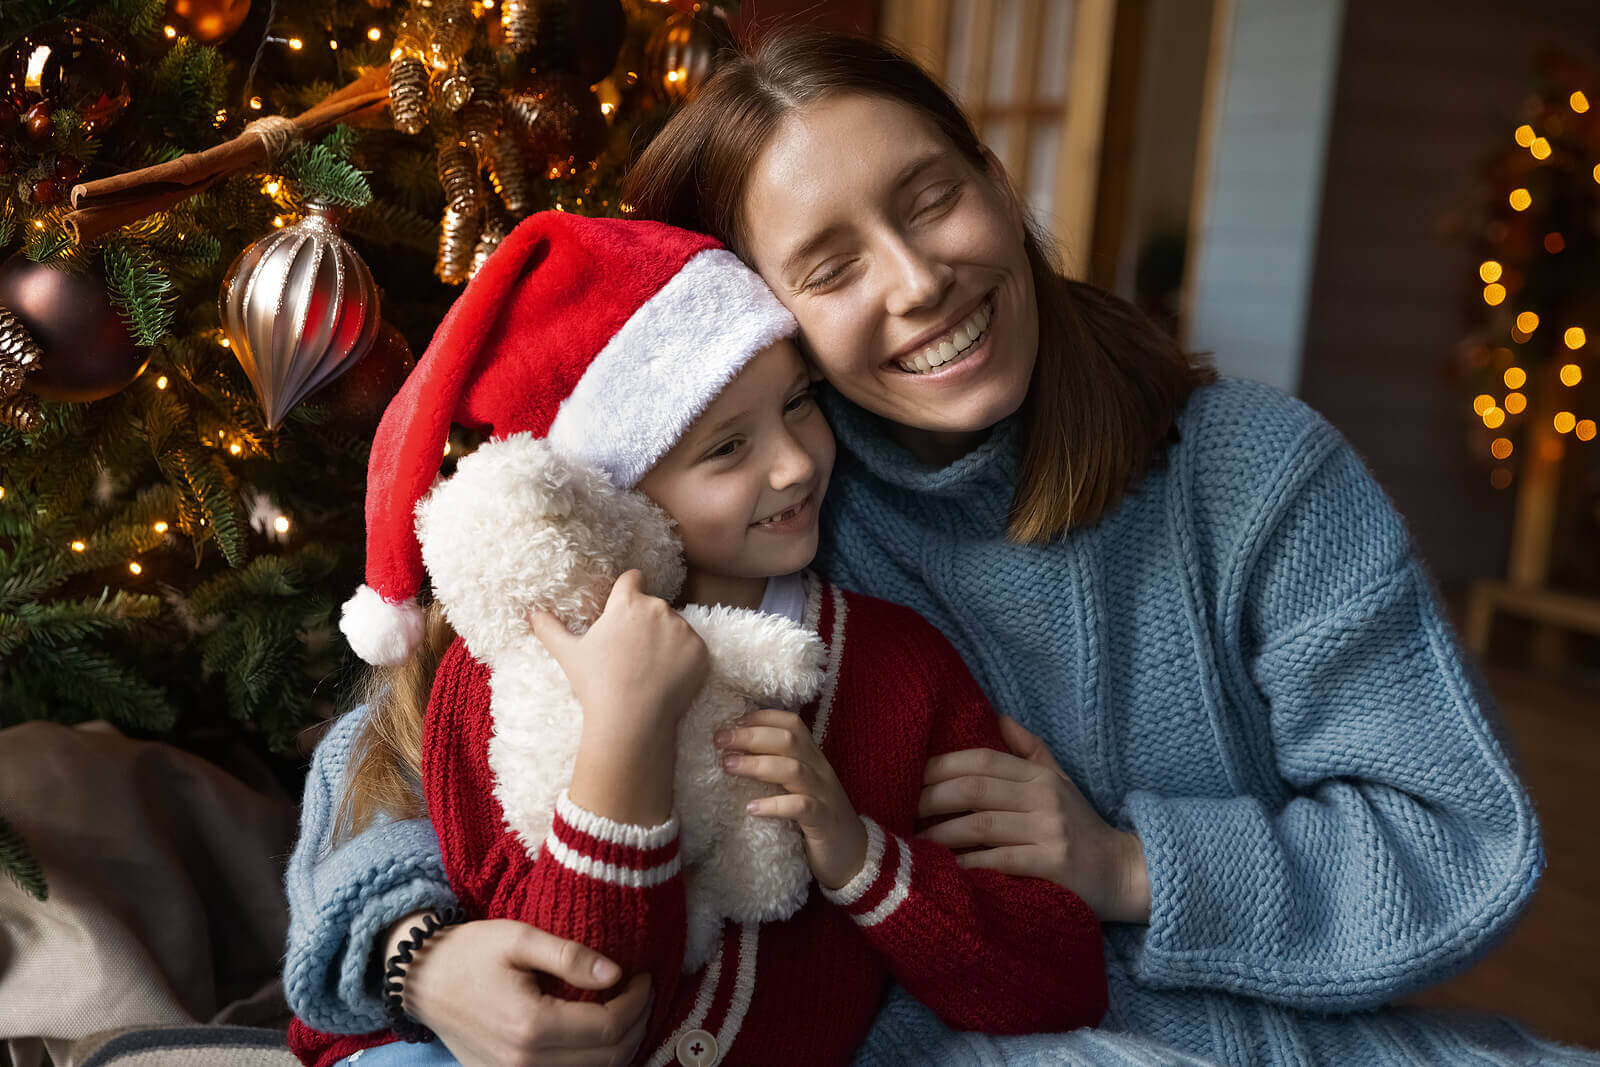 A mother and daughter hugging by the Christmas tree.